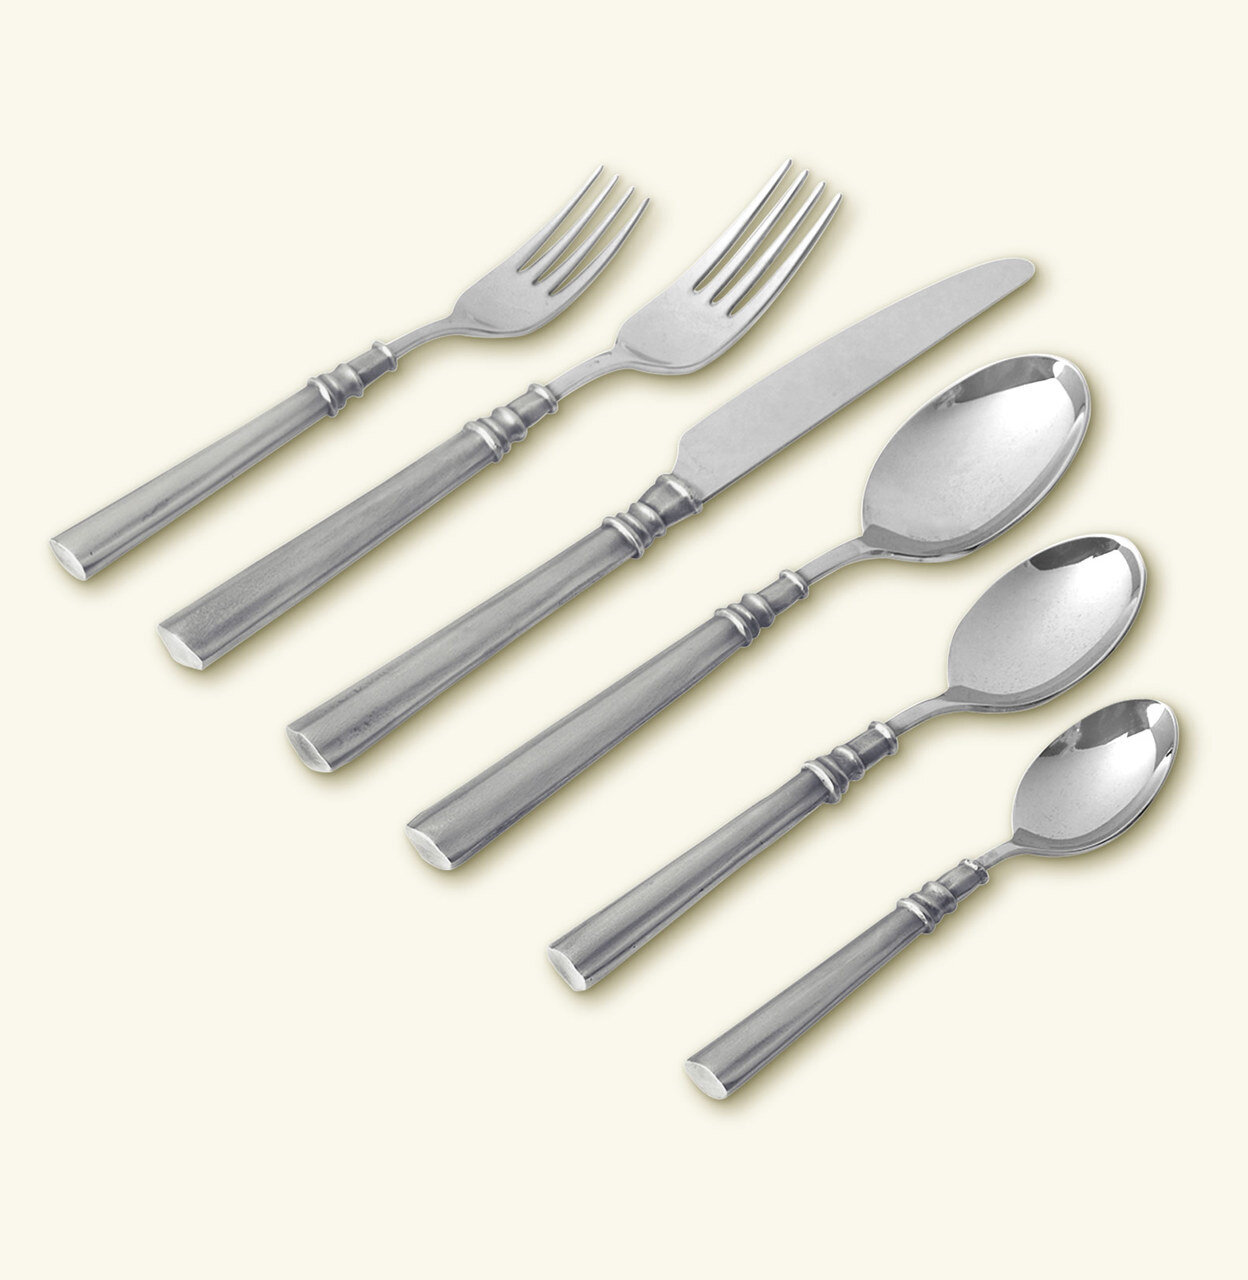 Match Pewter Lucia 6 Piece Place Setting With Forged Blade